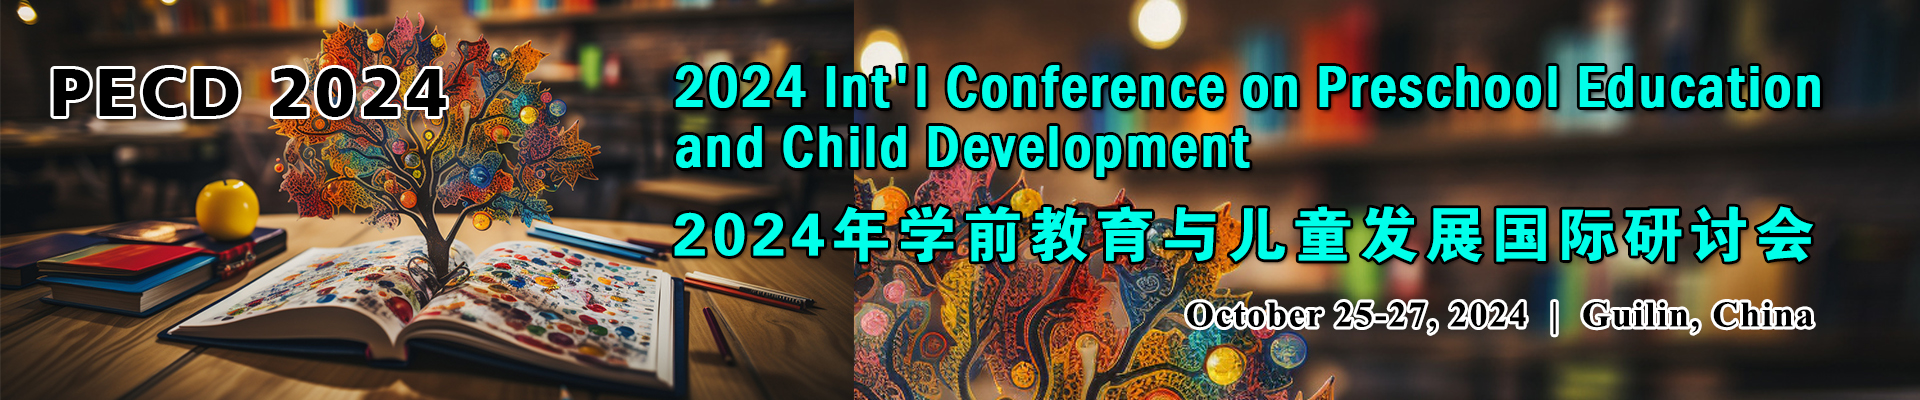 2024 Int'l Conference on Preschool Education and Child Development (PECD 2024), Guilin, Guangxi, China